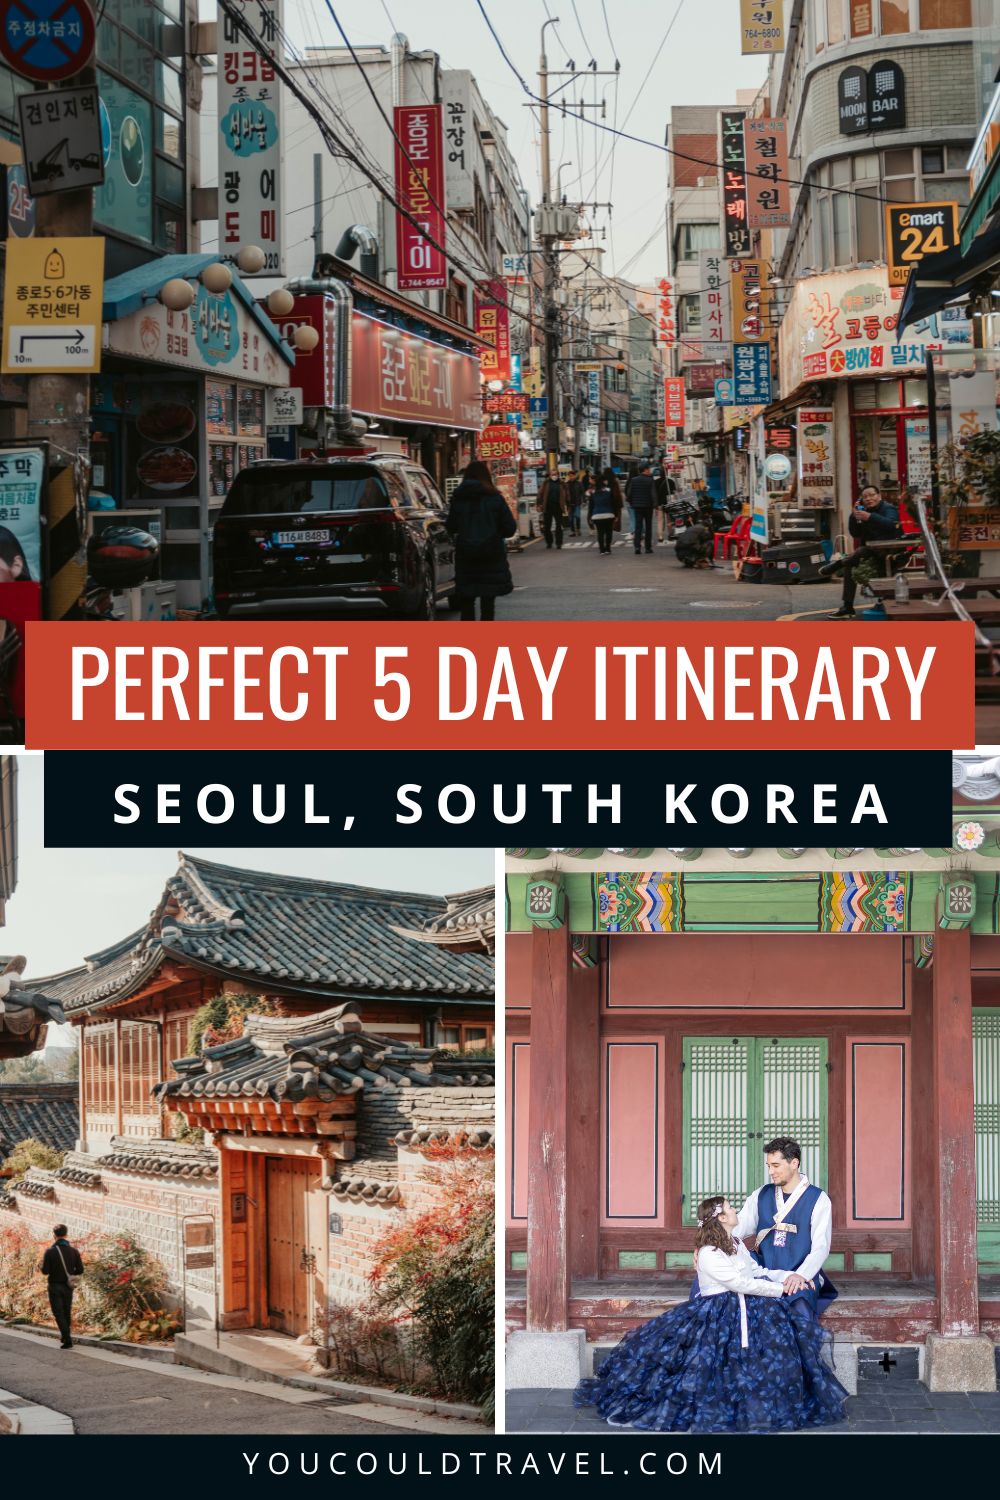 The perfect 5 day Seoul itinerary